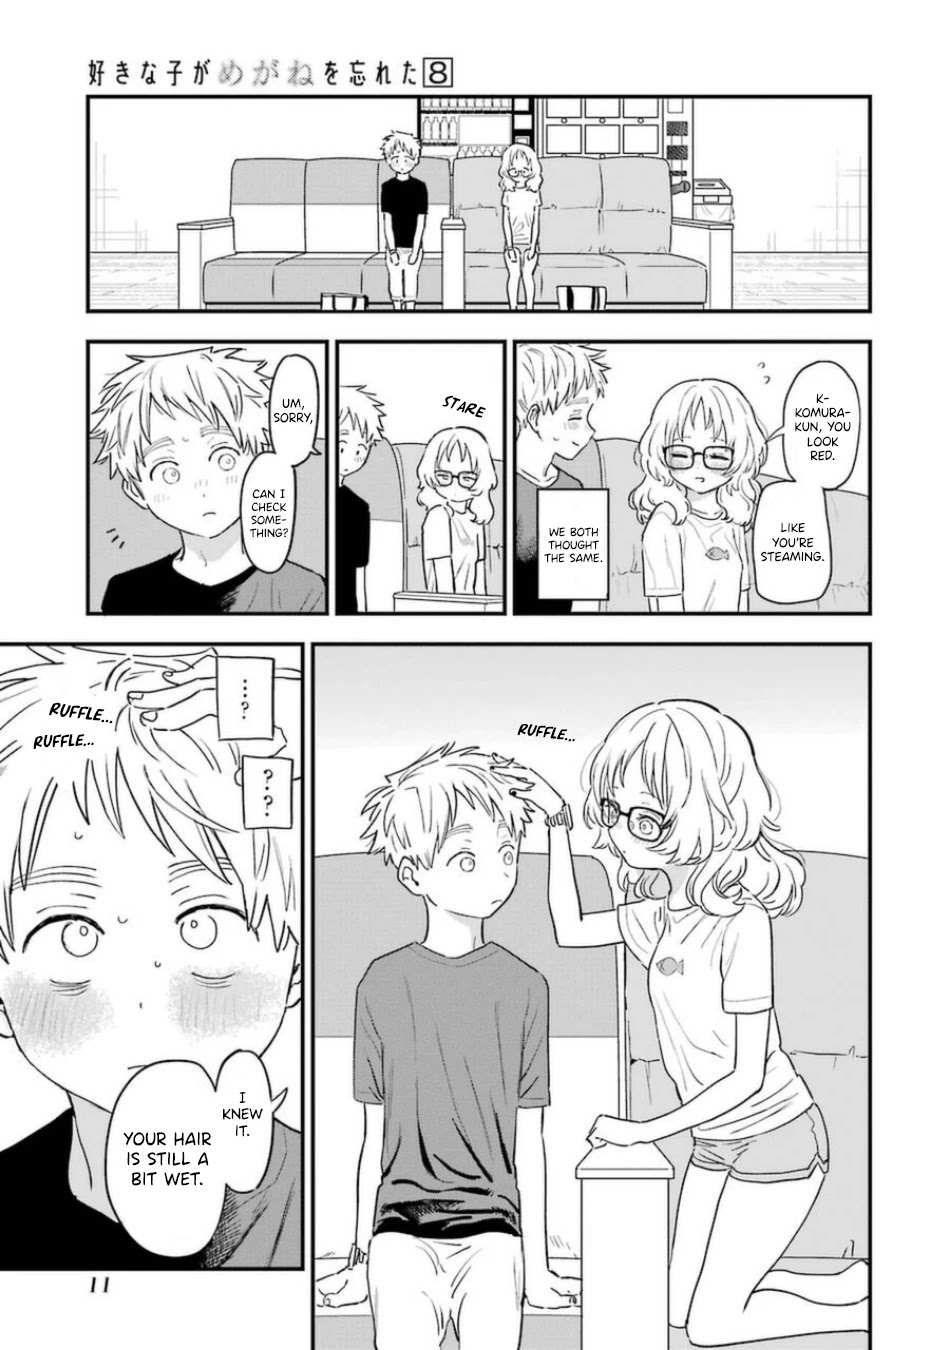 The Girl I Like Forgot Her Glasses chapter 75 page 15